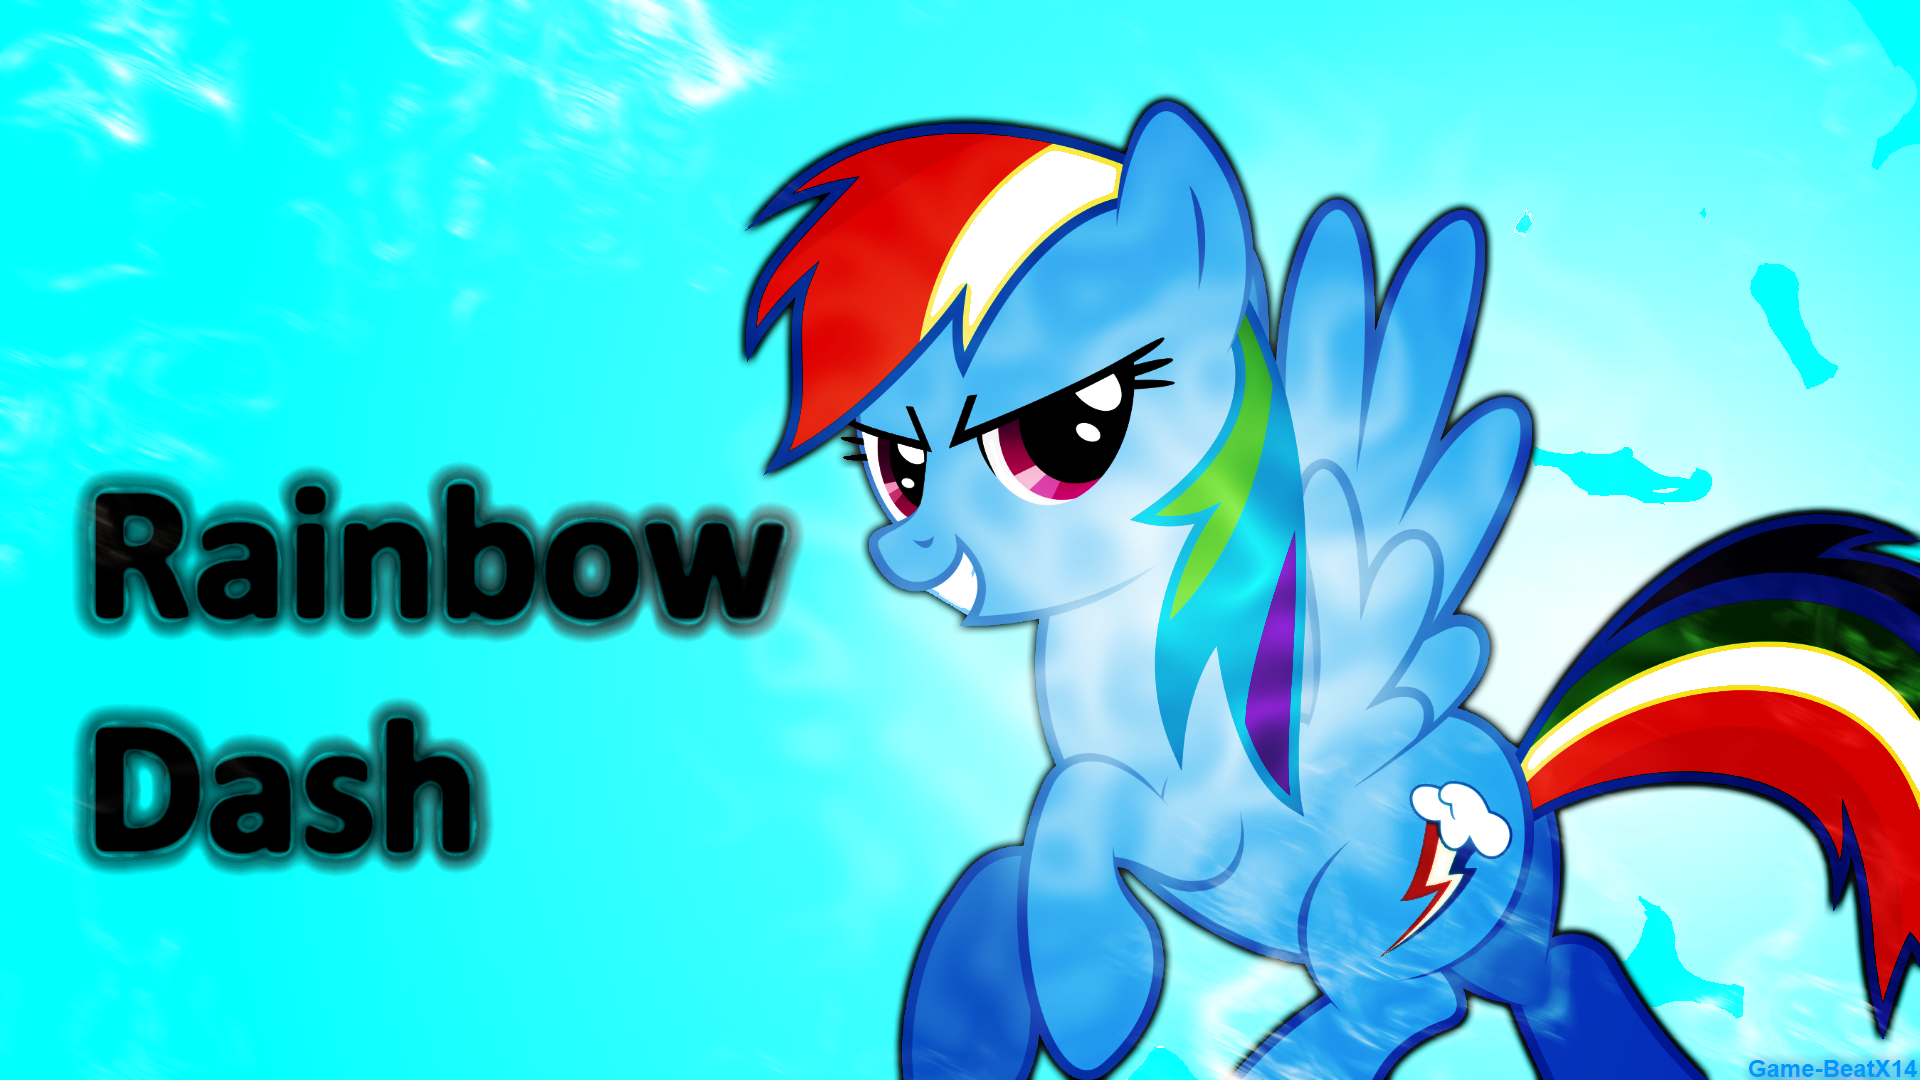 Rainbow Dash Wallpaper by Fehlung and Game-BeatX14